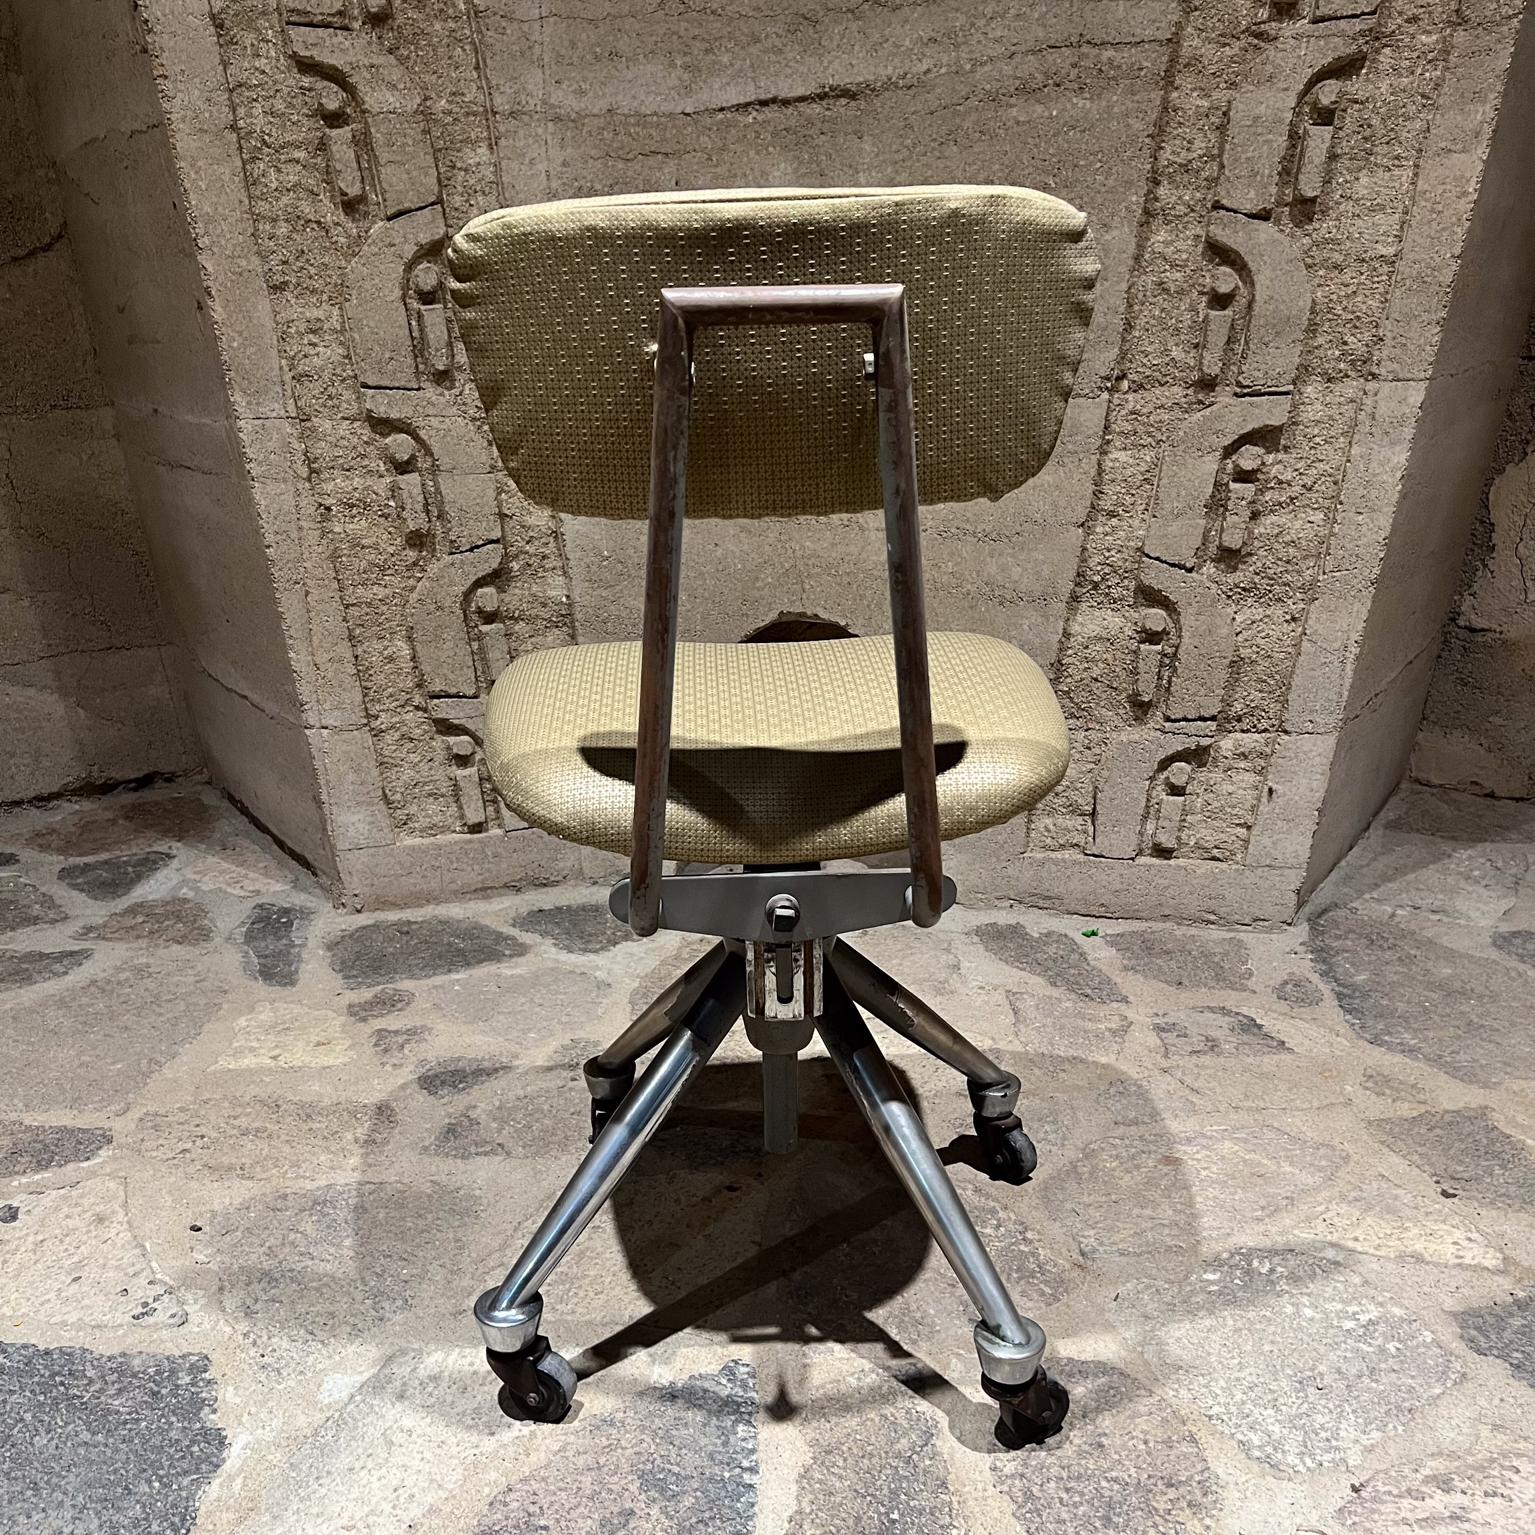 1950s Do More Office Chair Mid-Century Modern industrial era.
Domore Chair Company Inc founded in 1922 
by William S. Ferris in Elkhart, Indiana.
Seat height adjustable.
Four-star base original chrome and rubber wheels.
Unusual base with a